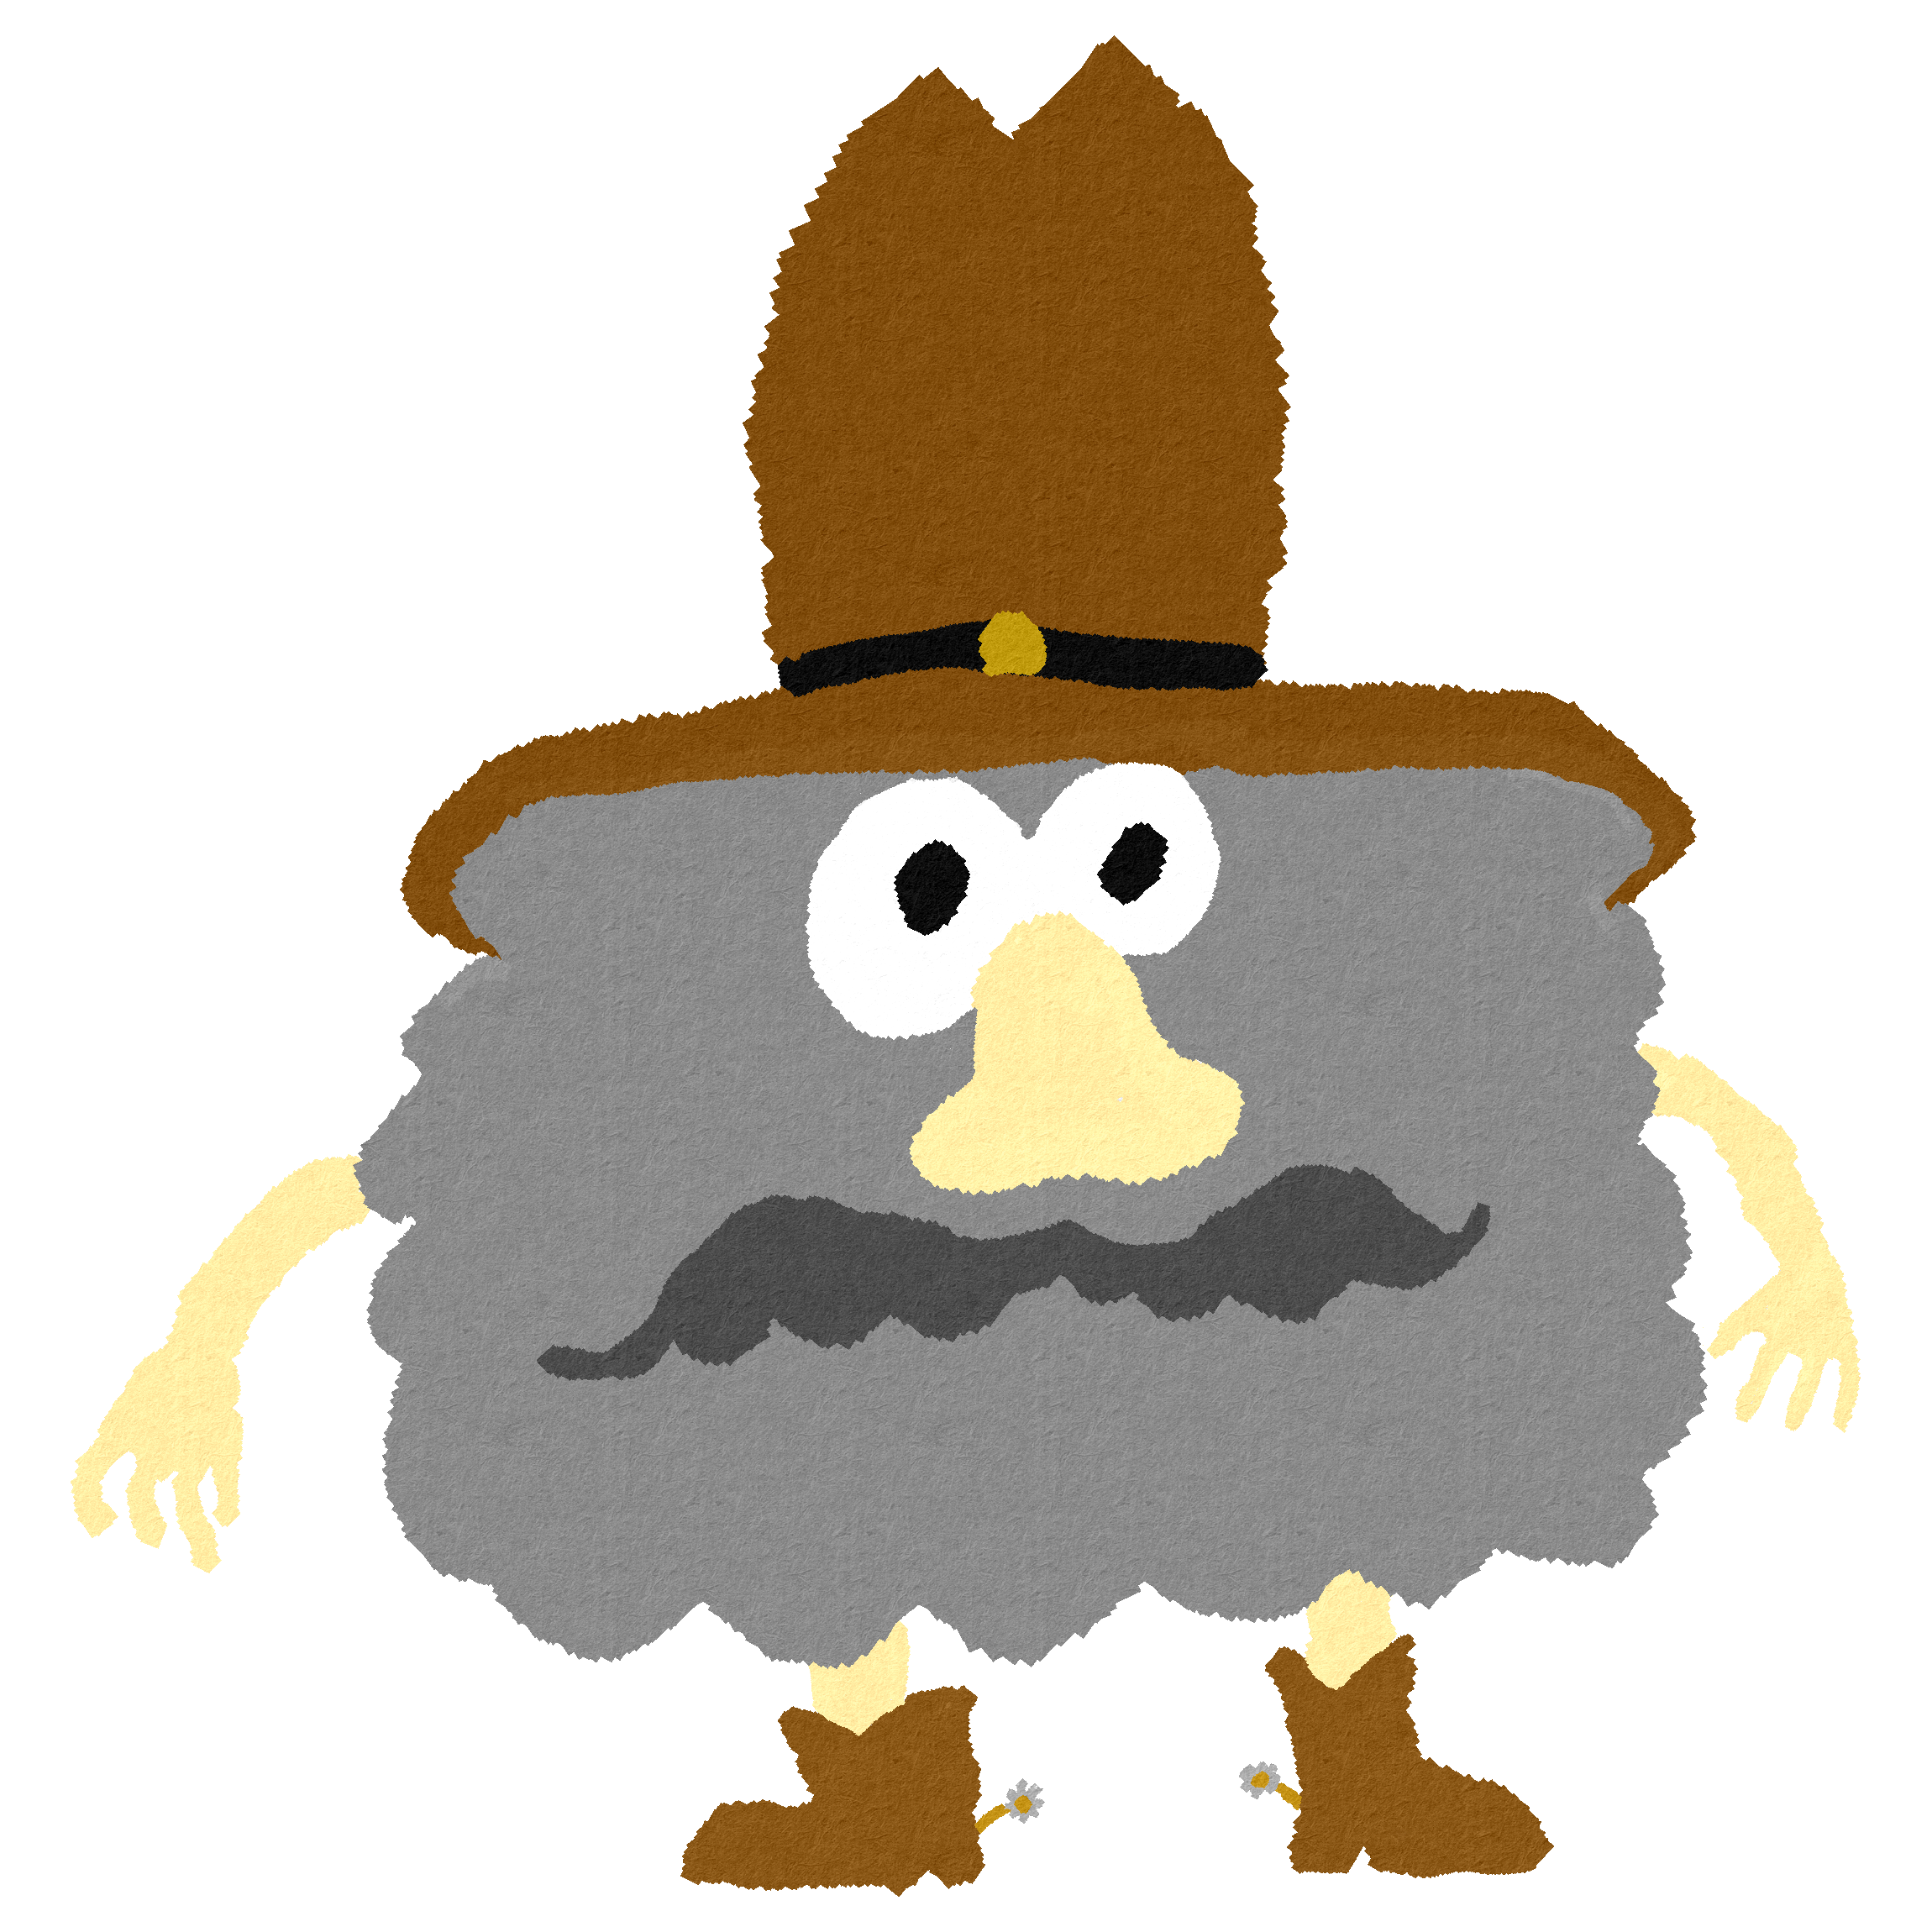 A square gnome with a cowboy hat